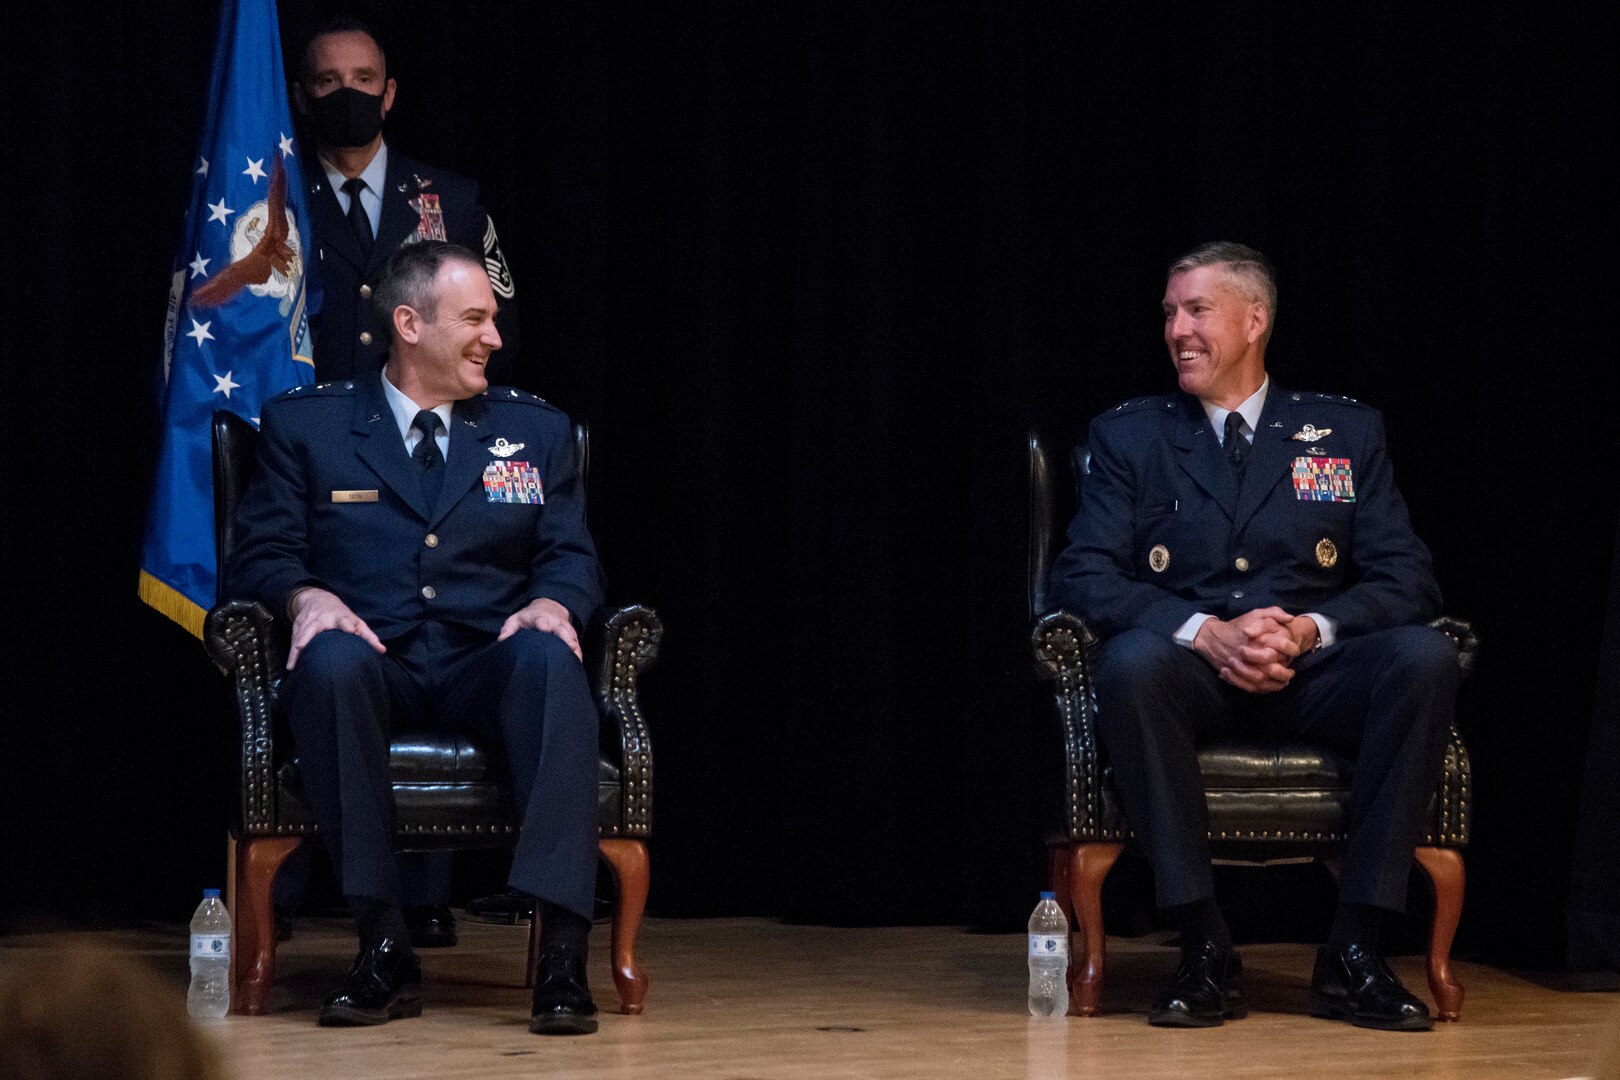 photo of Maj. Gen. Toth an Maj. Gen. Craige sitting on stage and laughing during the change of command ceremony.